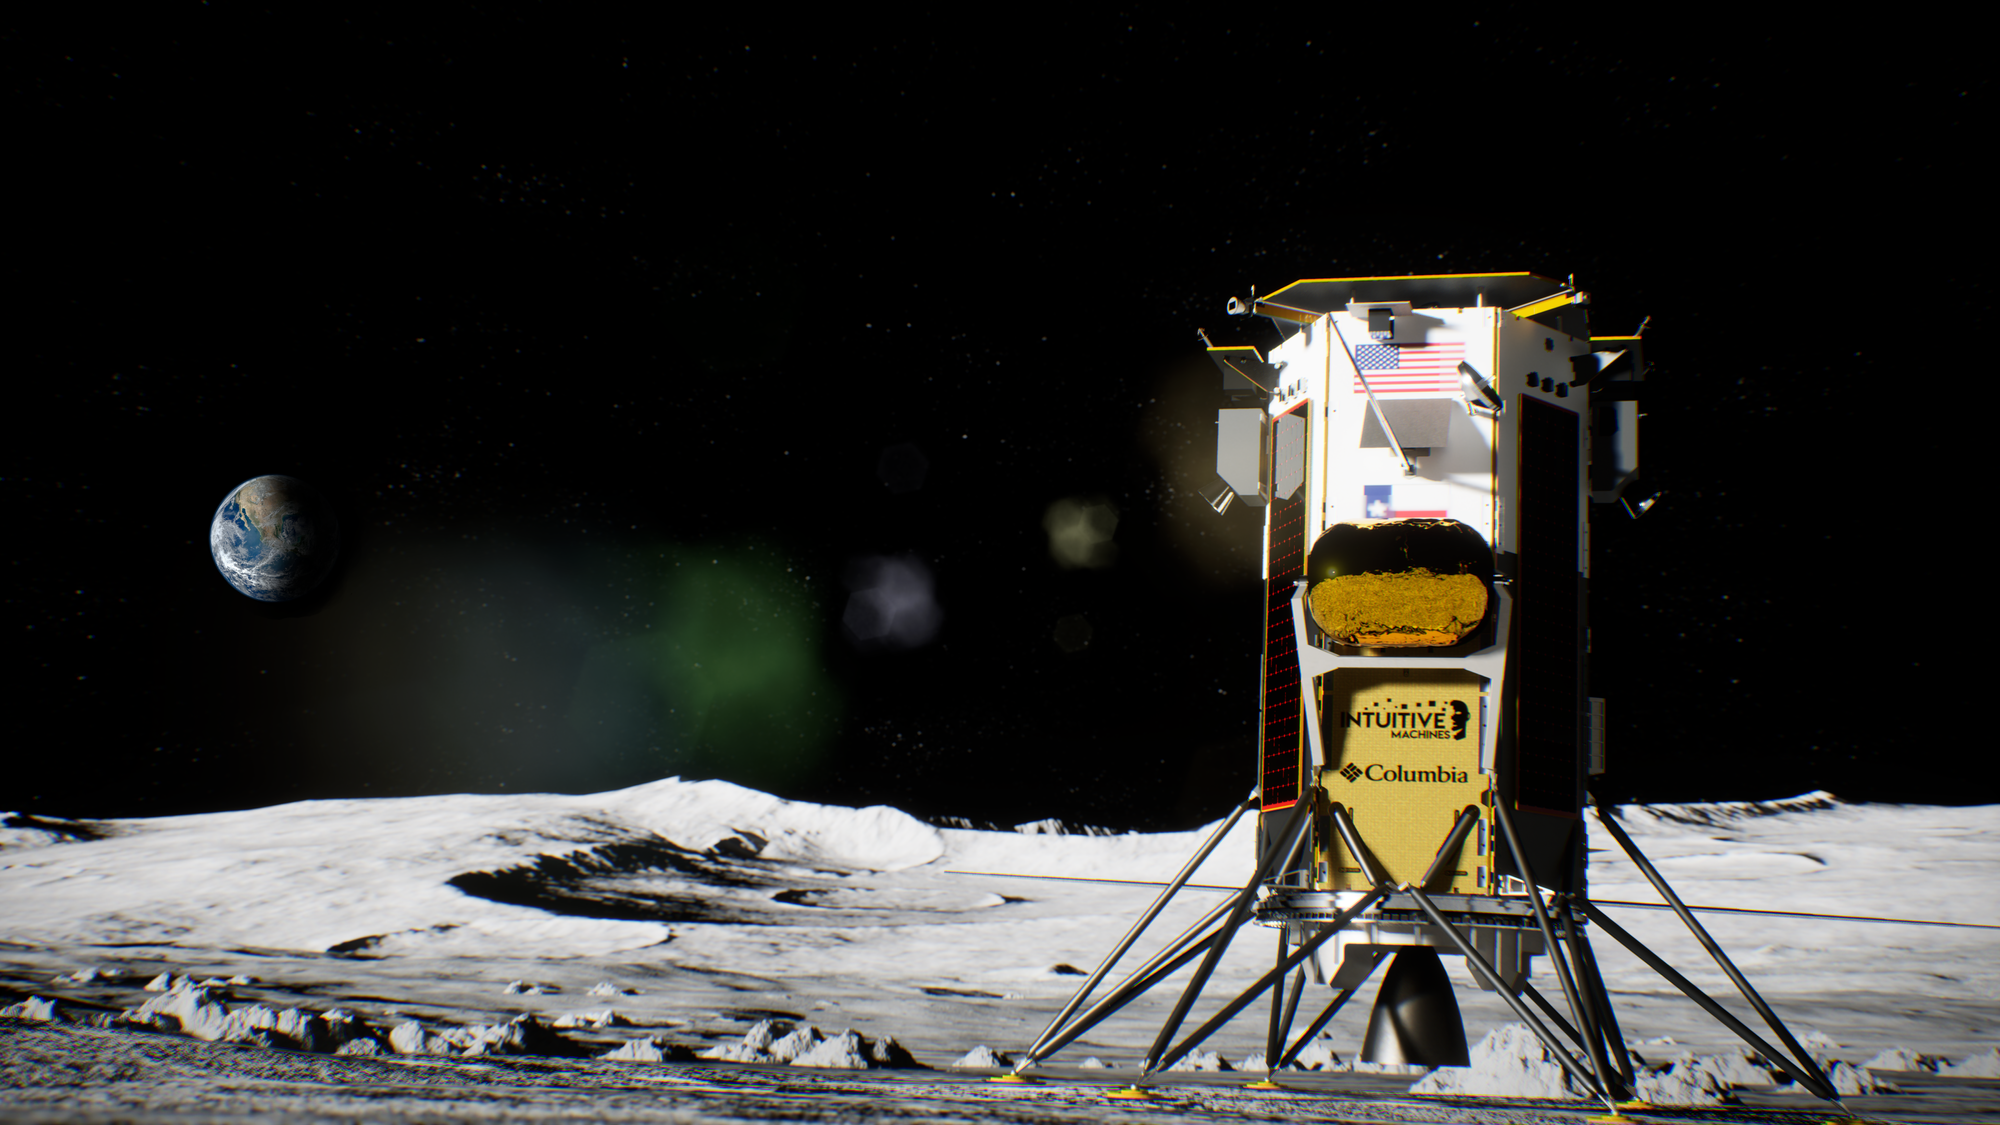 A render of the Nova-C IM-1 lander on the lunar surface. ©Intuitive Machines